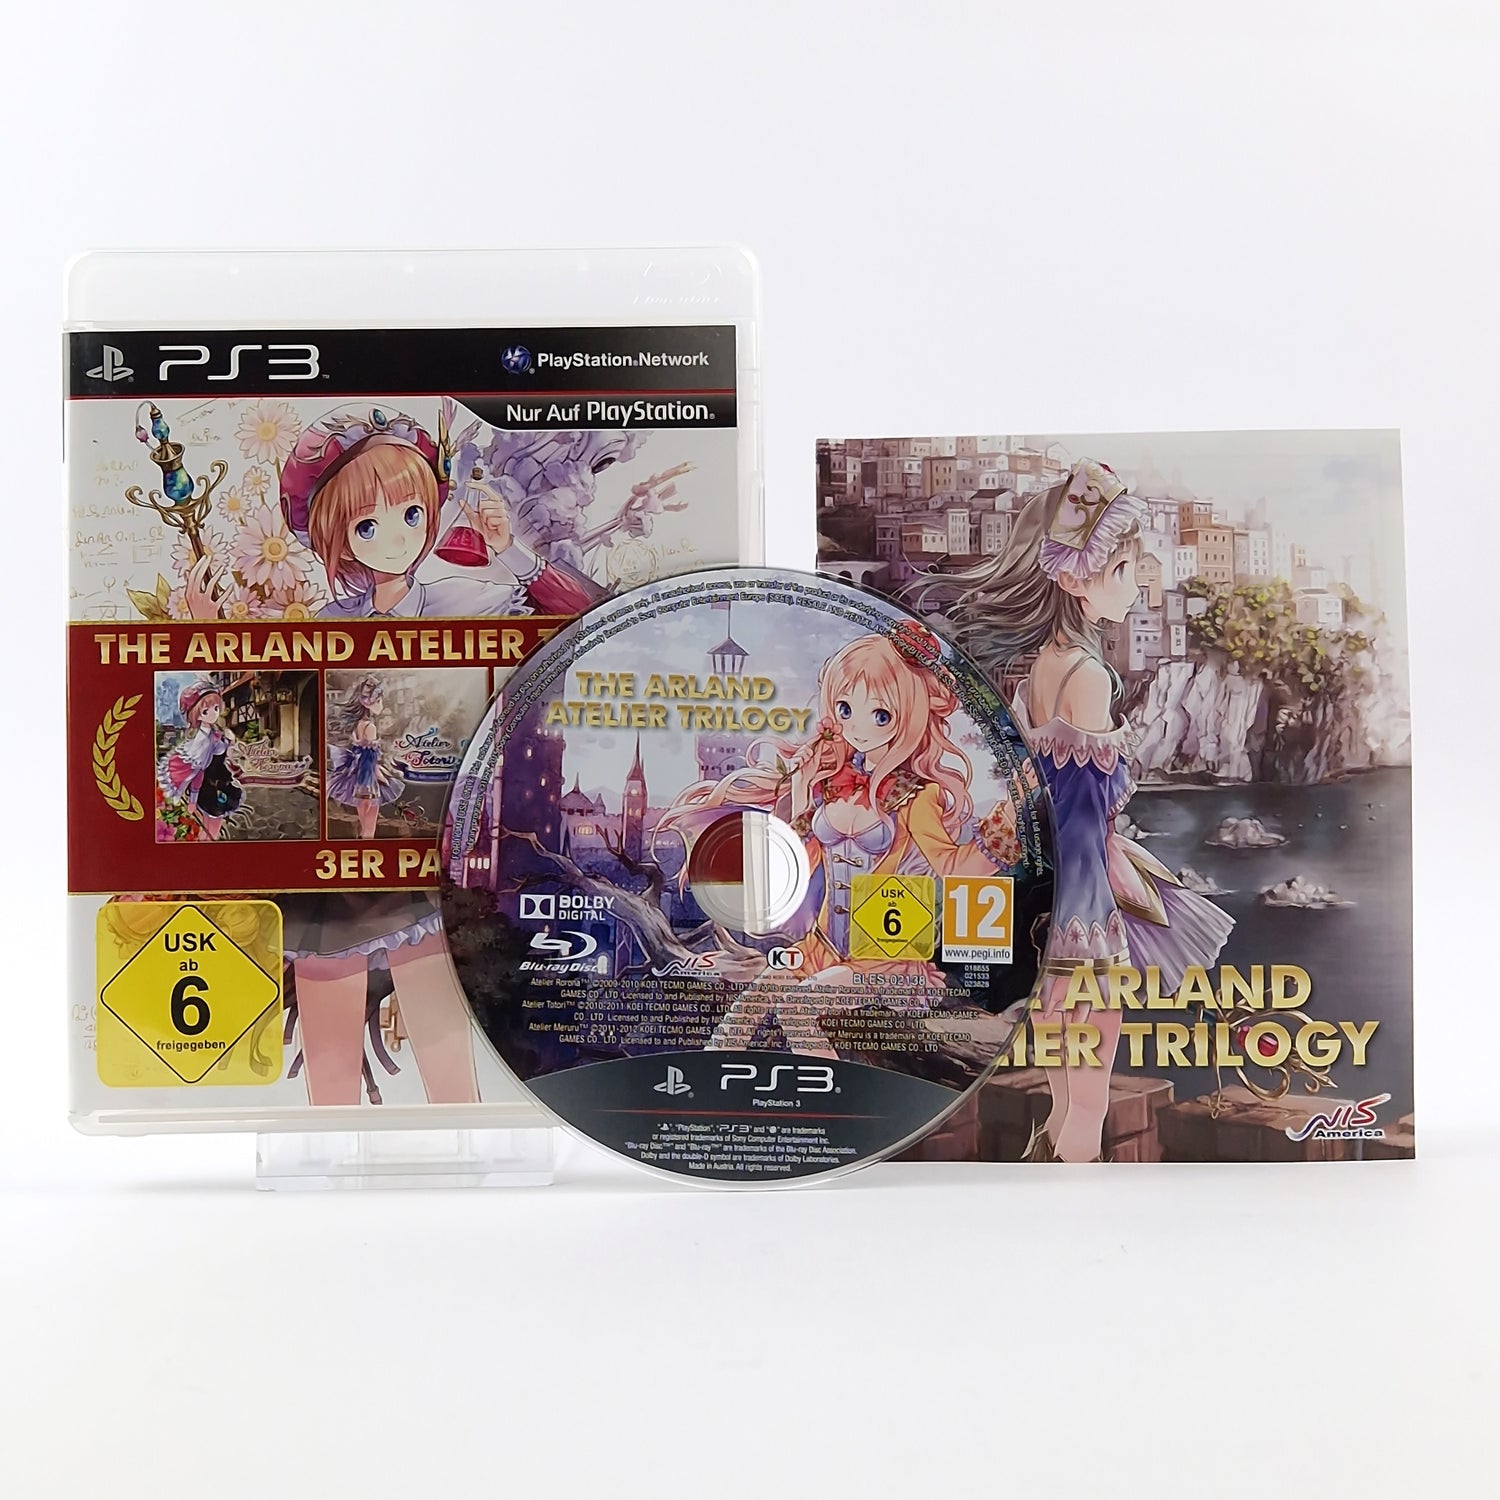 Sony Playstation 3 Game: The Arland Atelier Trilogy - OVP Instructions PAL PS3